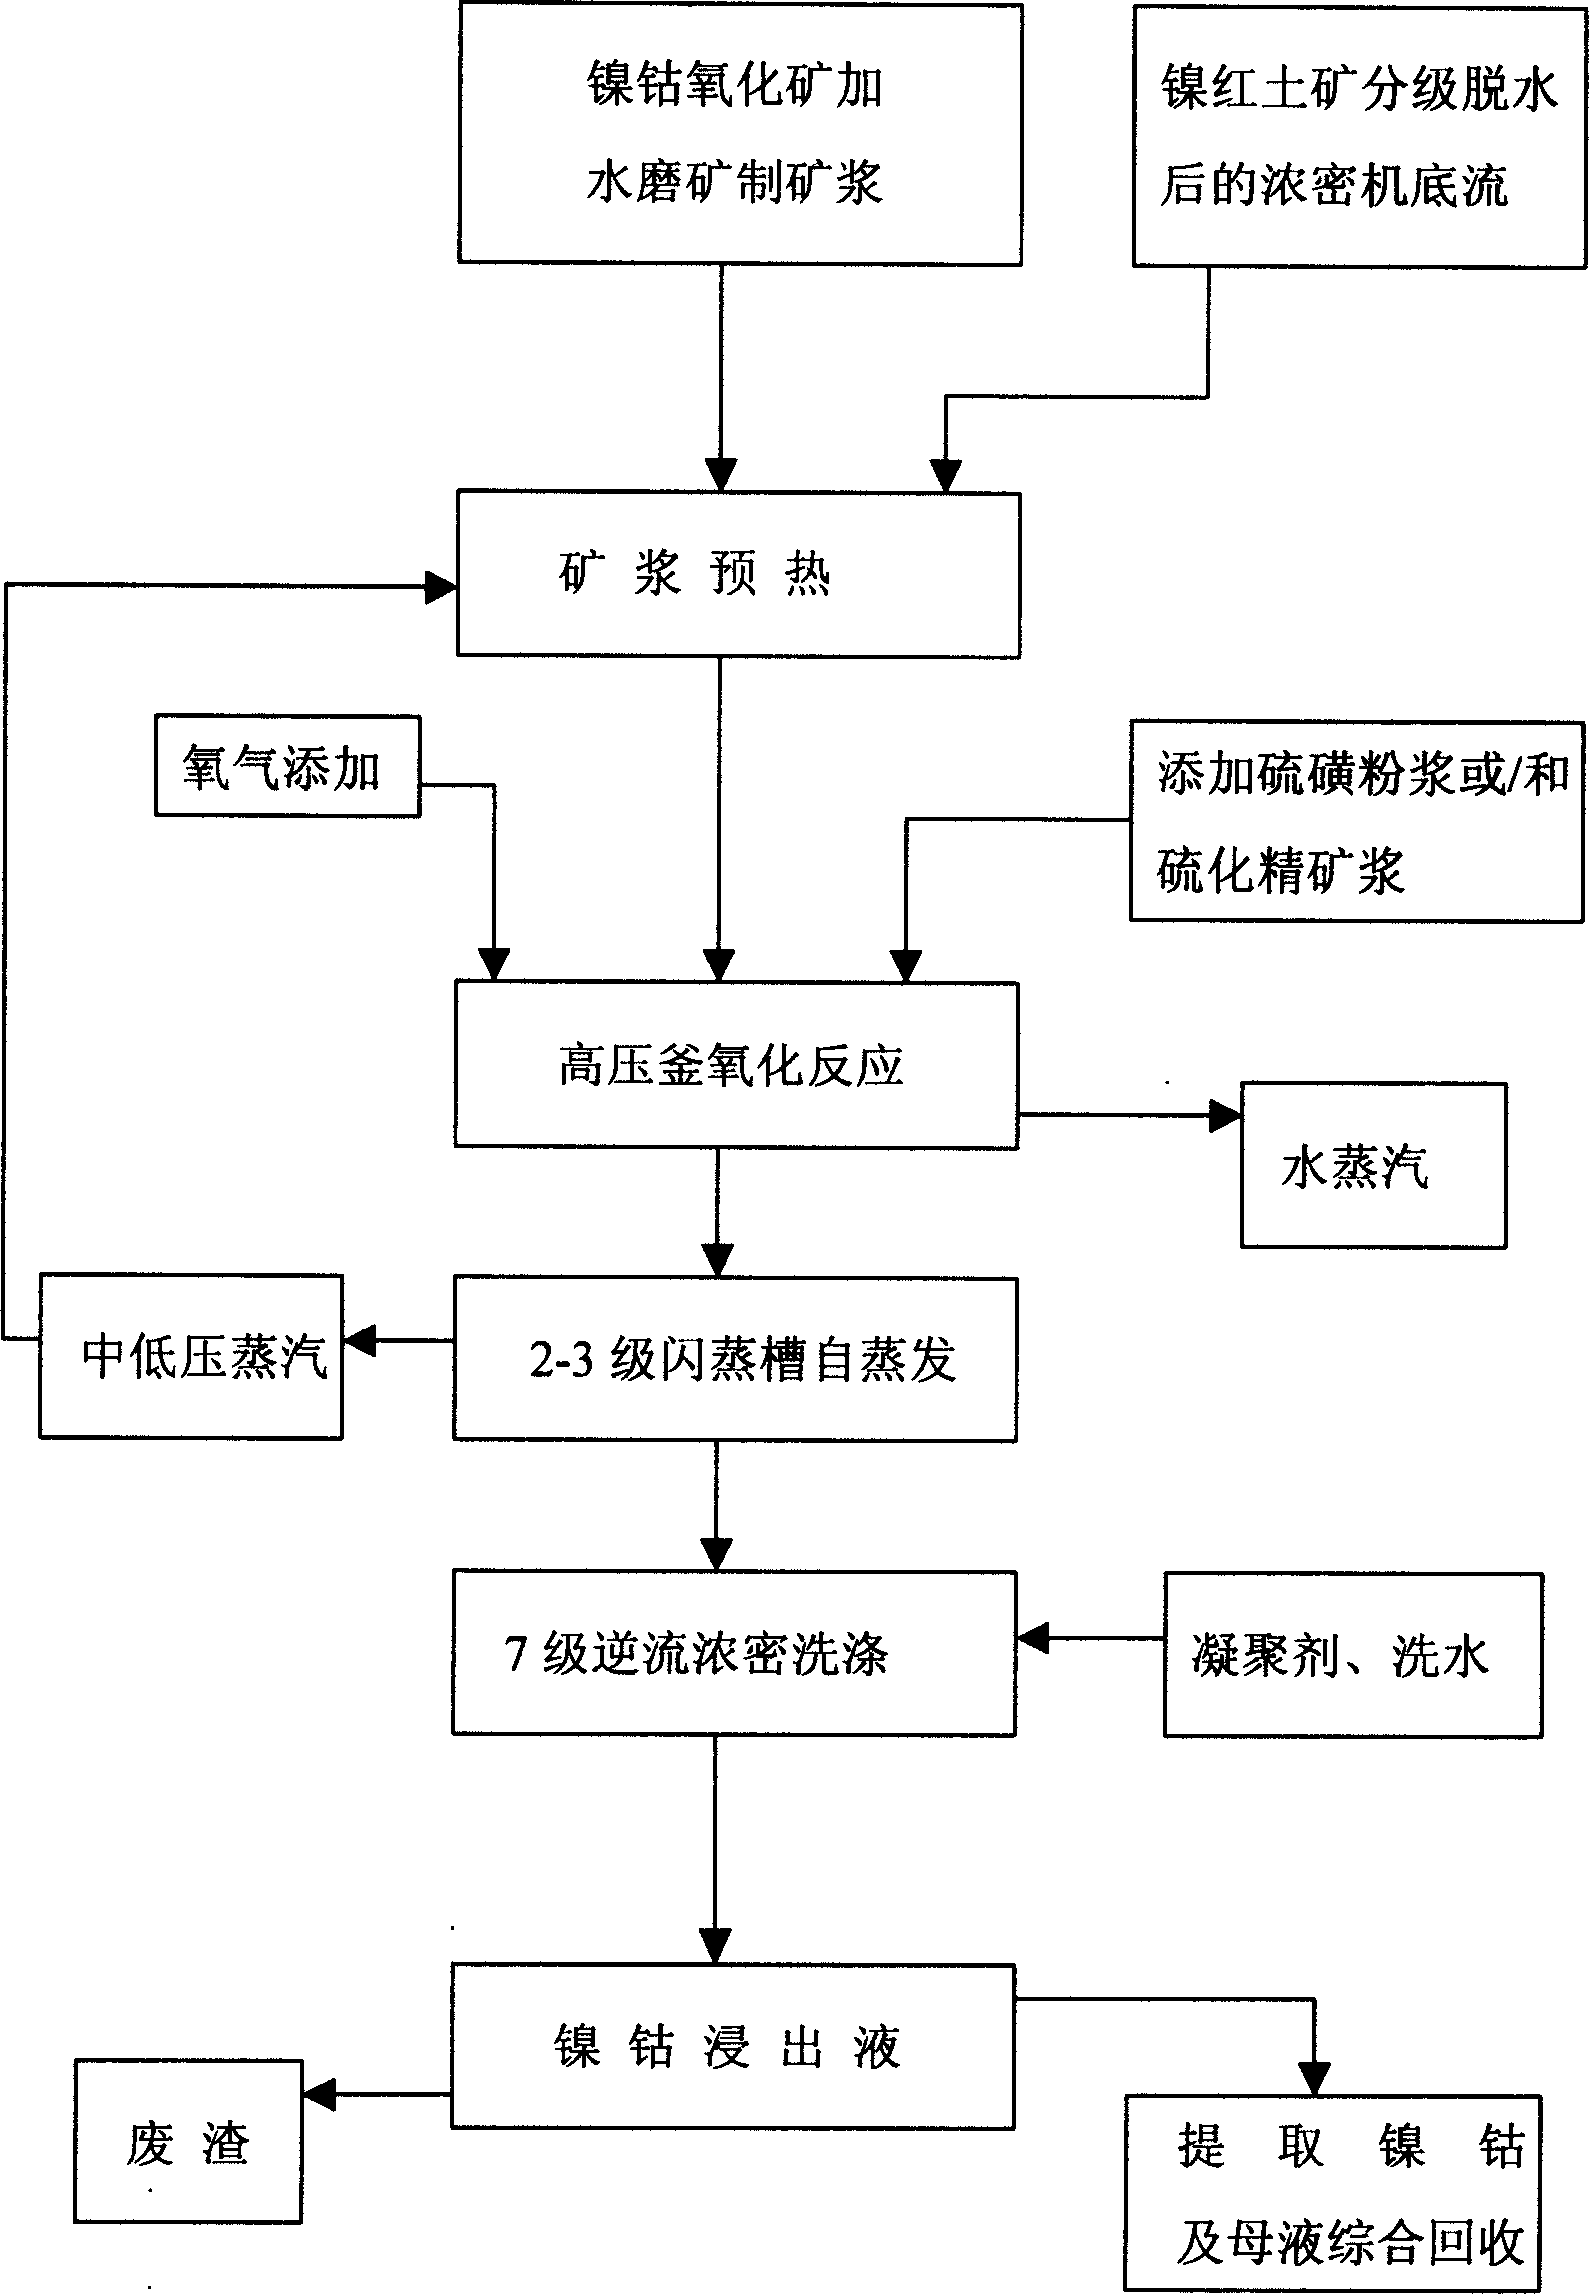 Pressure oxidation leaching-out method for nickel-cobalt oxide ore